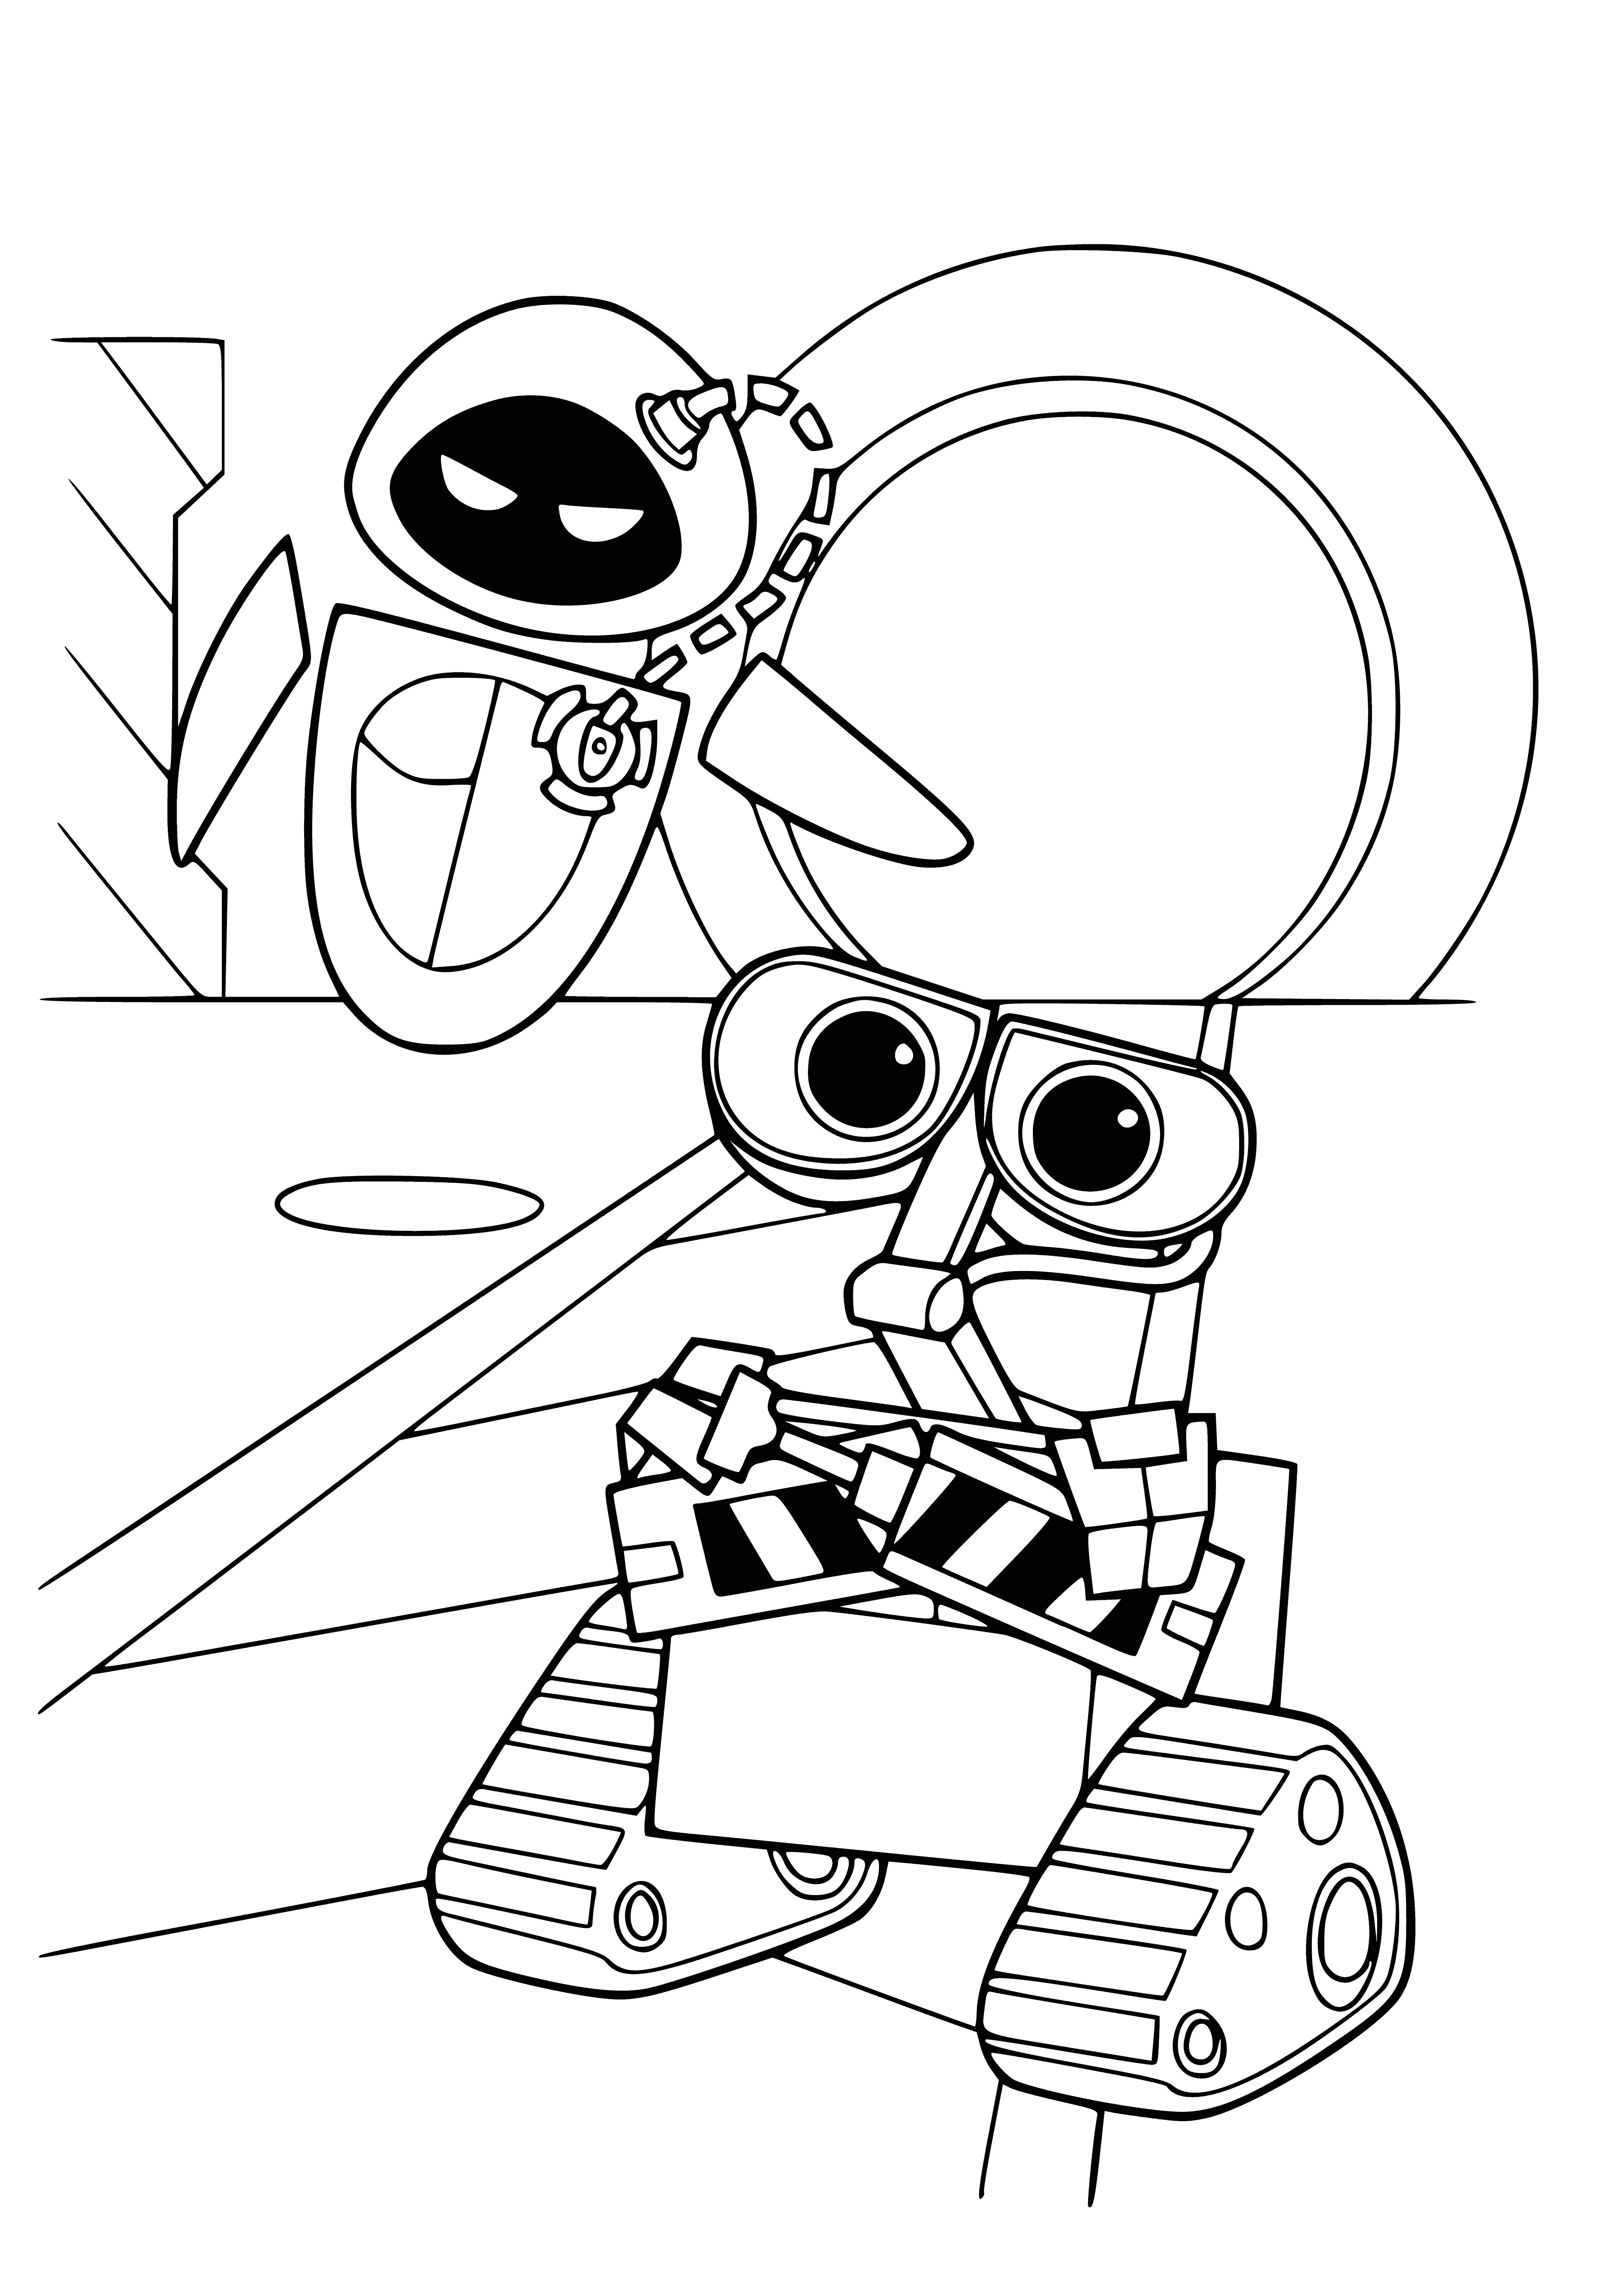 coloring page: Valley & Eve are 2 robots in a garden: Valley is large/round/clawed, Eve small/slender/holding a flower! #robotfriendship